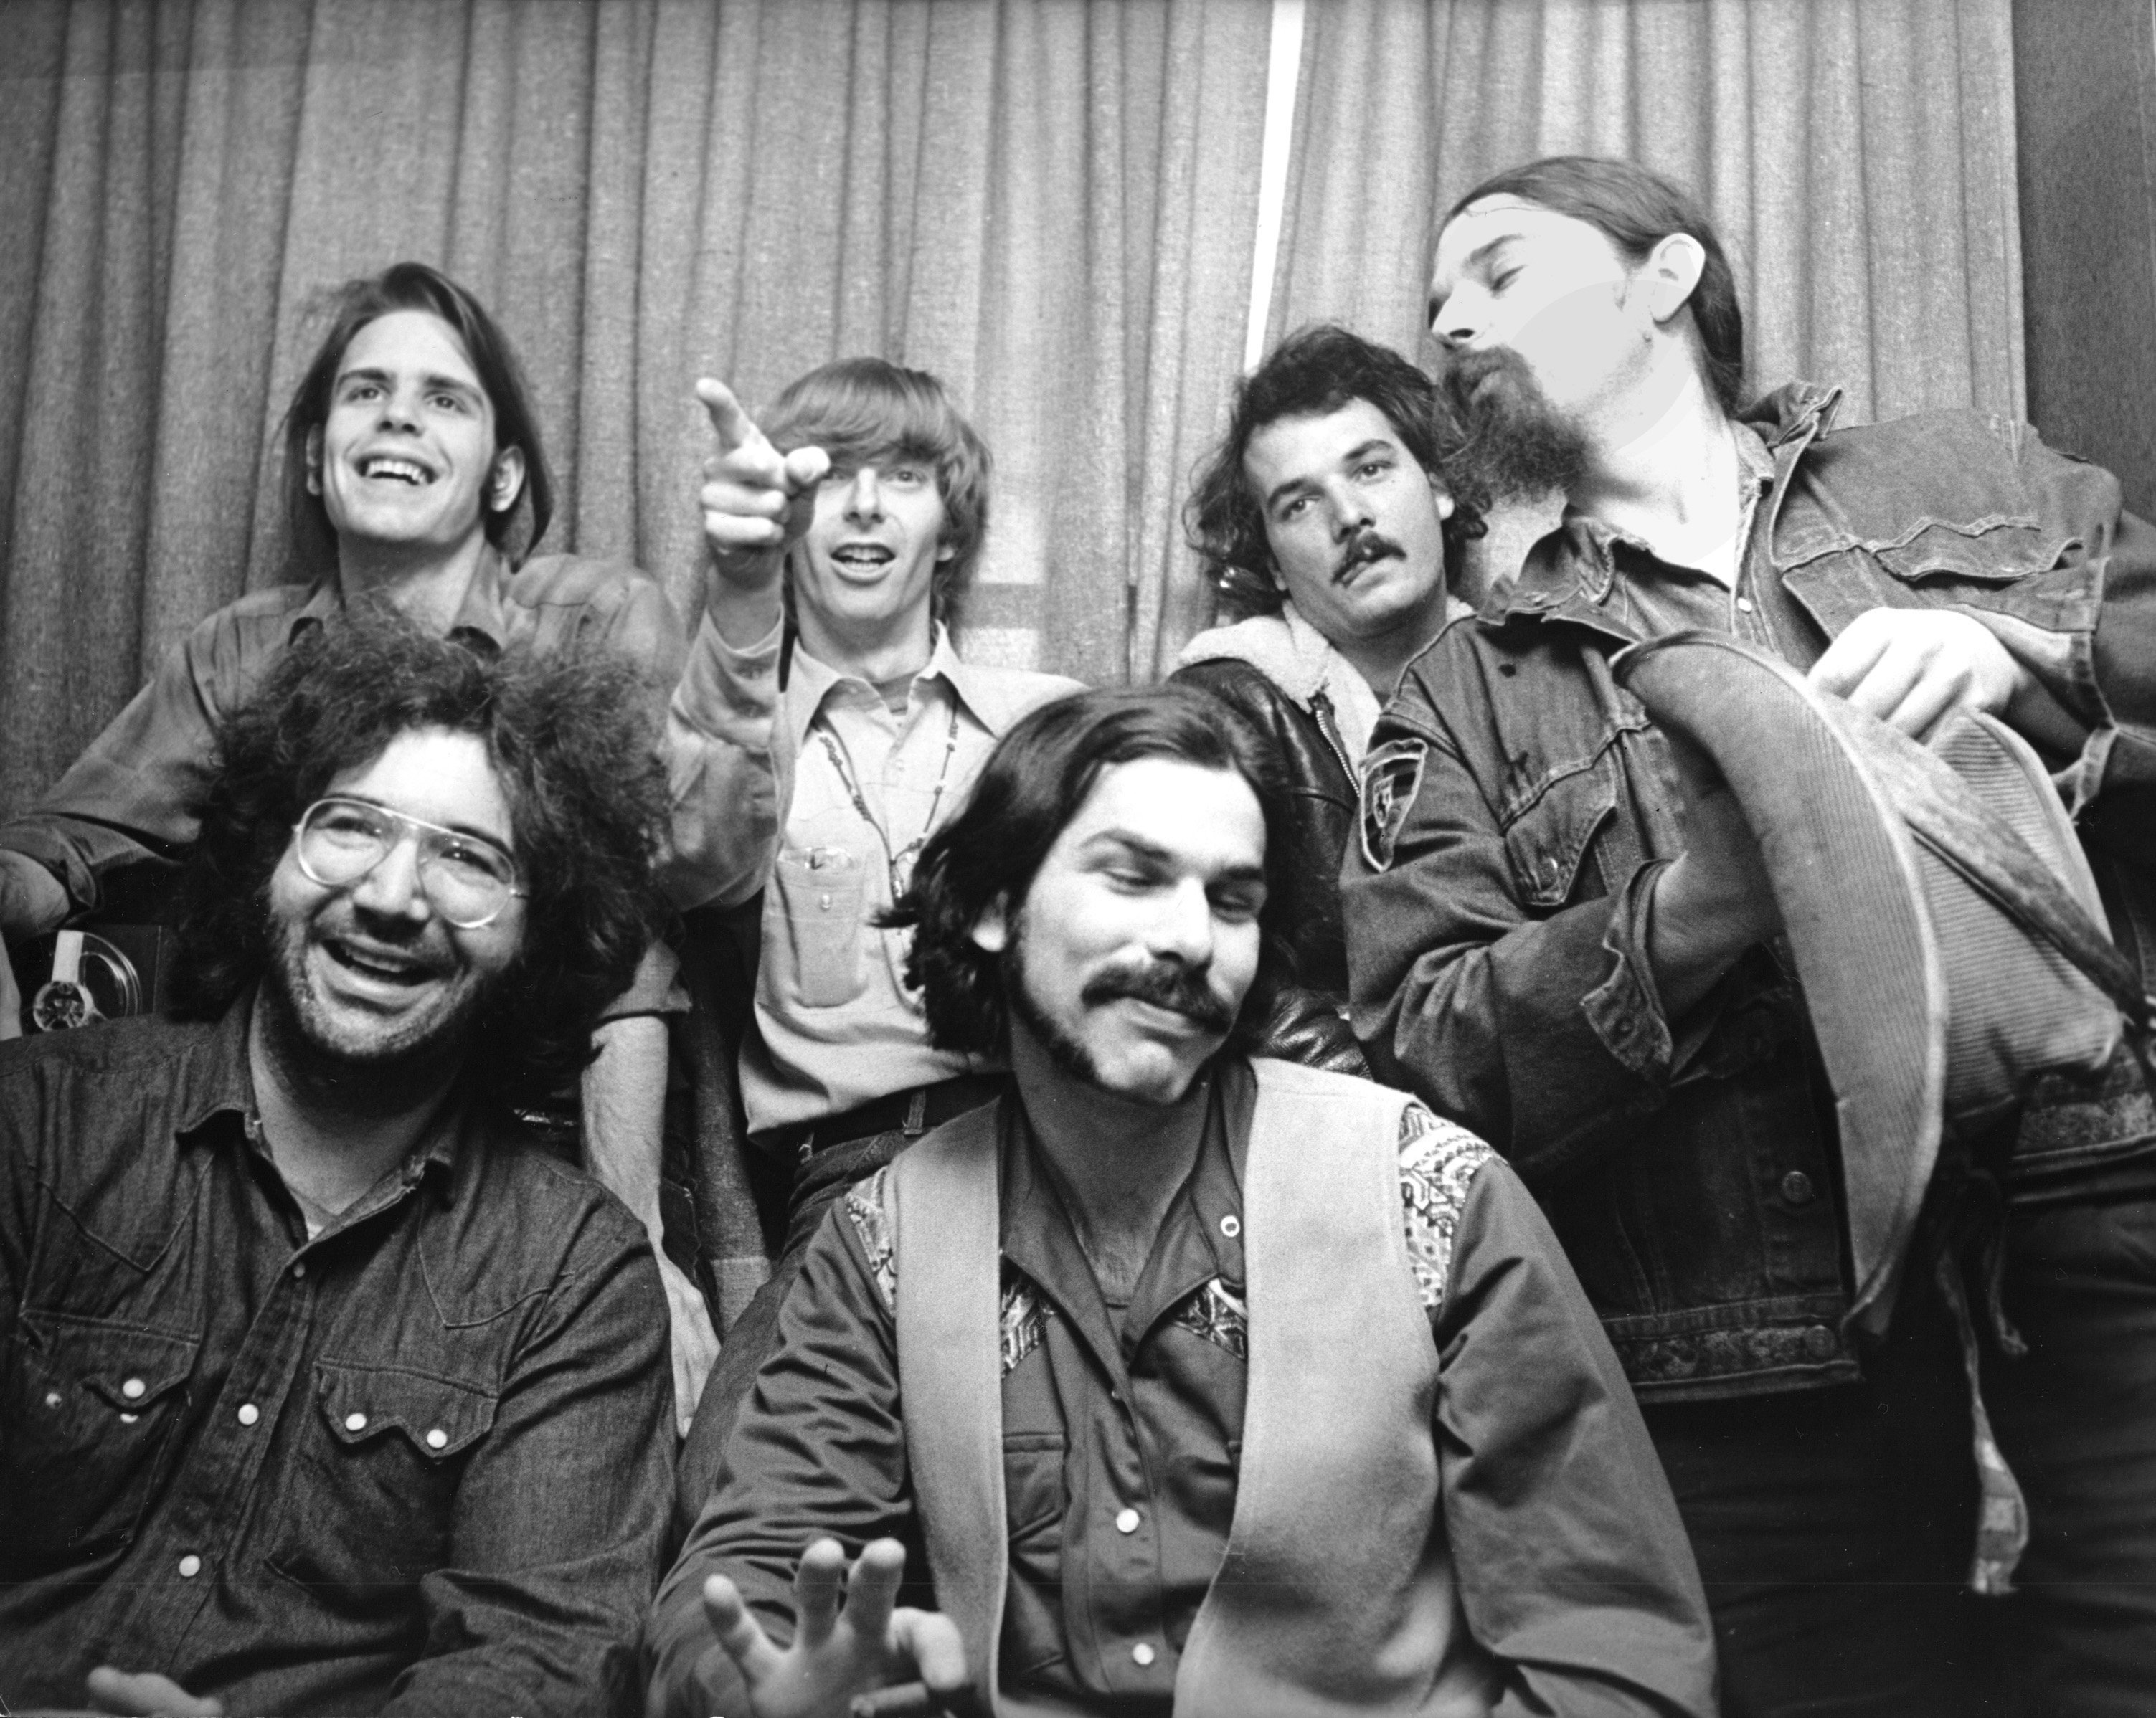 The Grateful Dead in front of a curtain